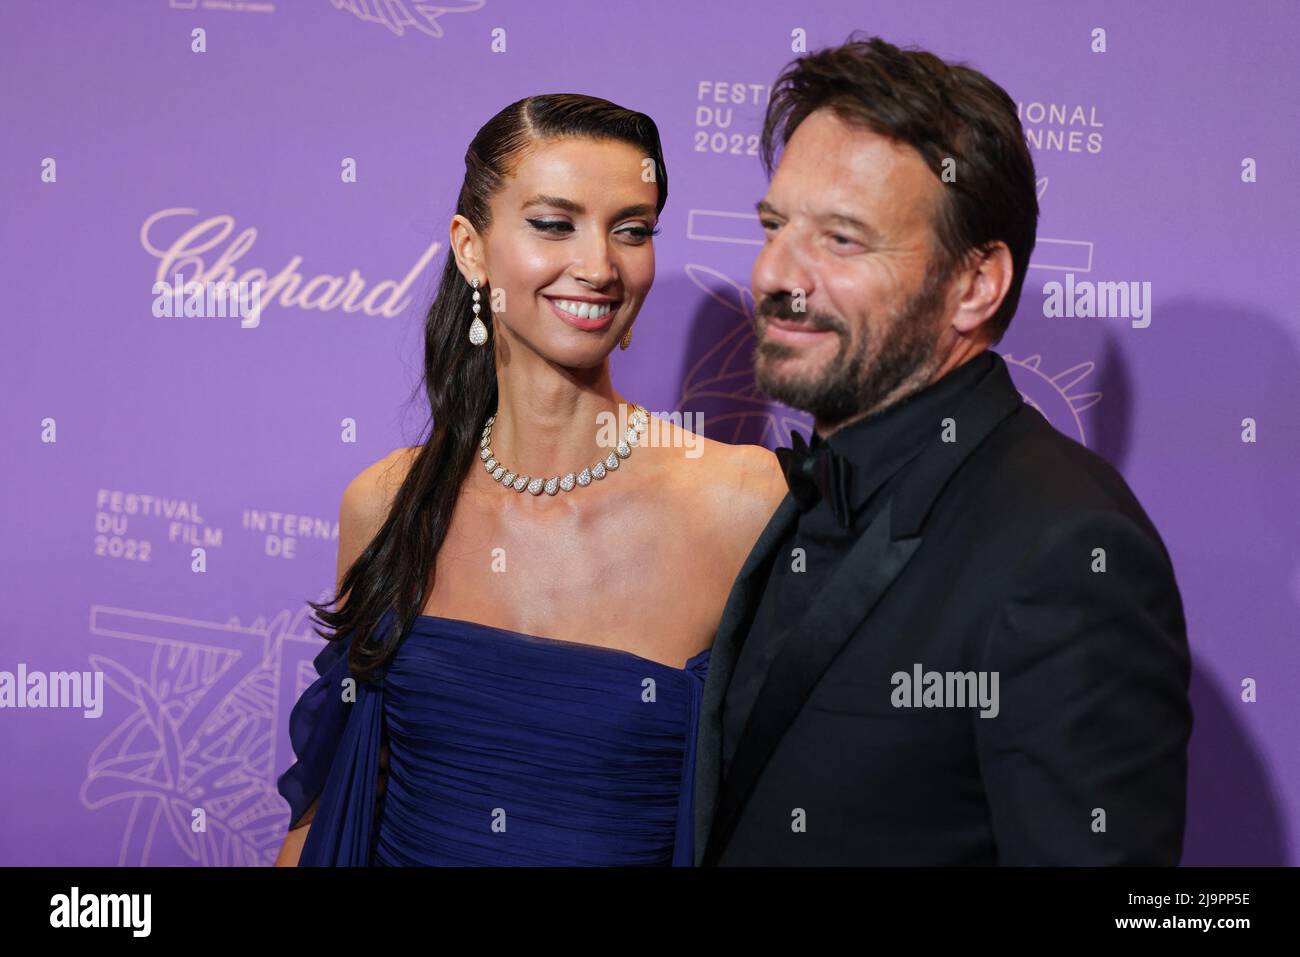 Stefania Christian and jury Member of the Camera D'or Samuel Le Bihan  attending the "Cannes 75" Anniversary Dinner during the 75th annual Cannes  film festival at on May 24, 2022 in Cannes,